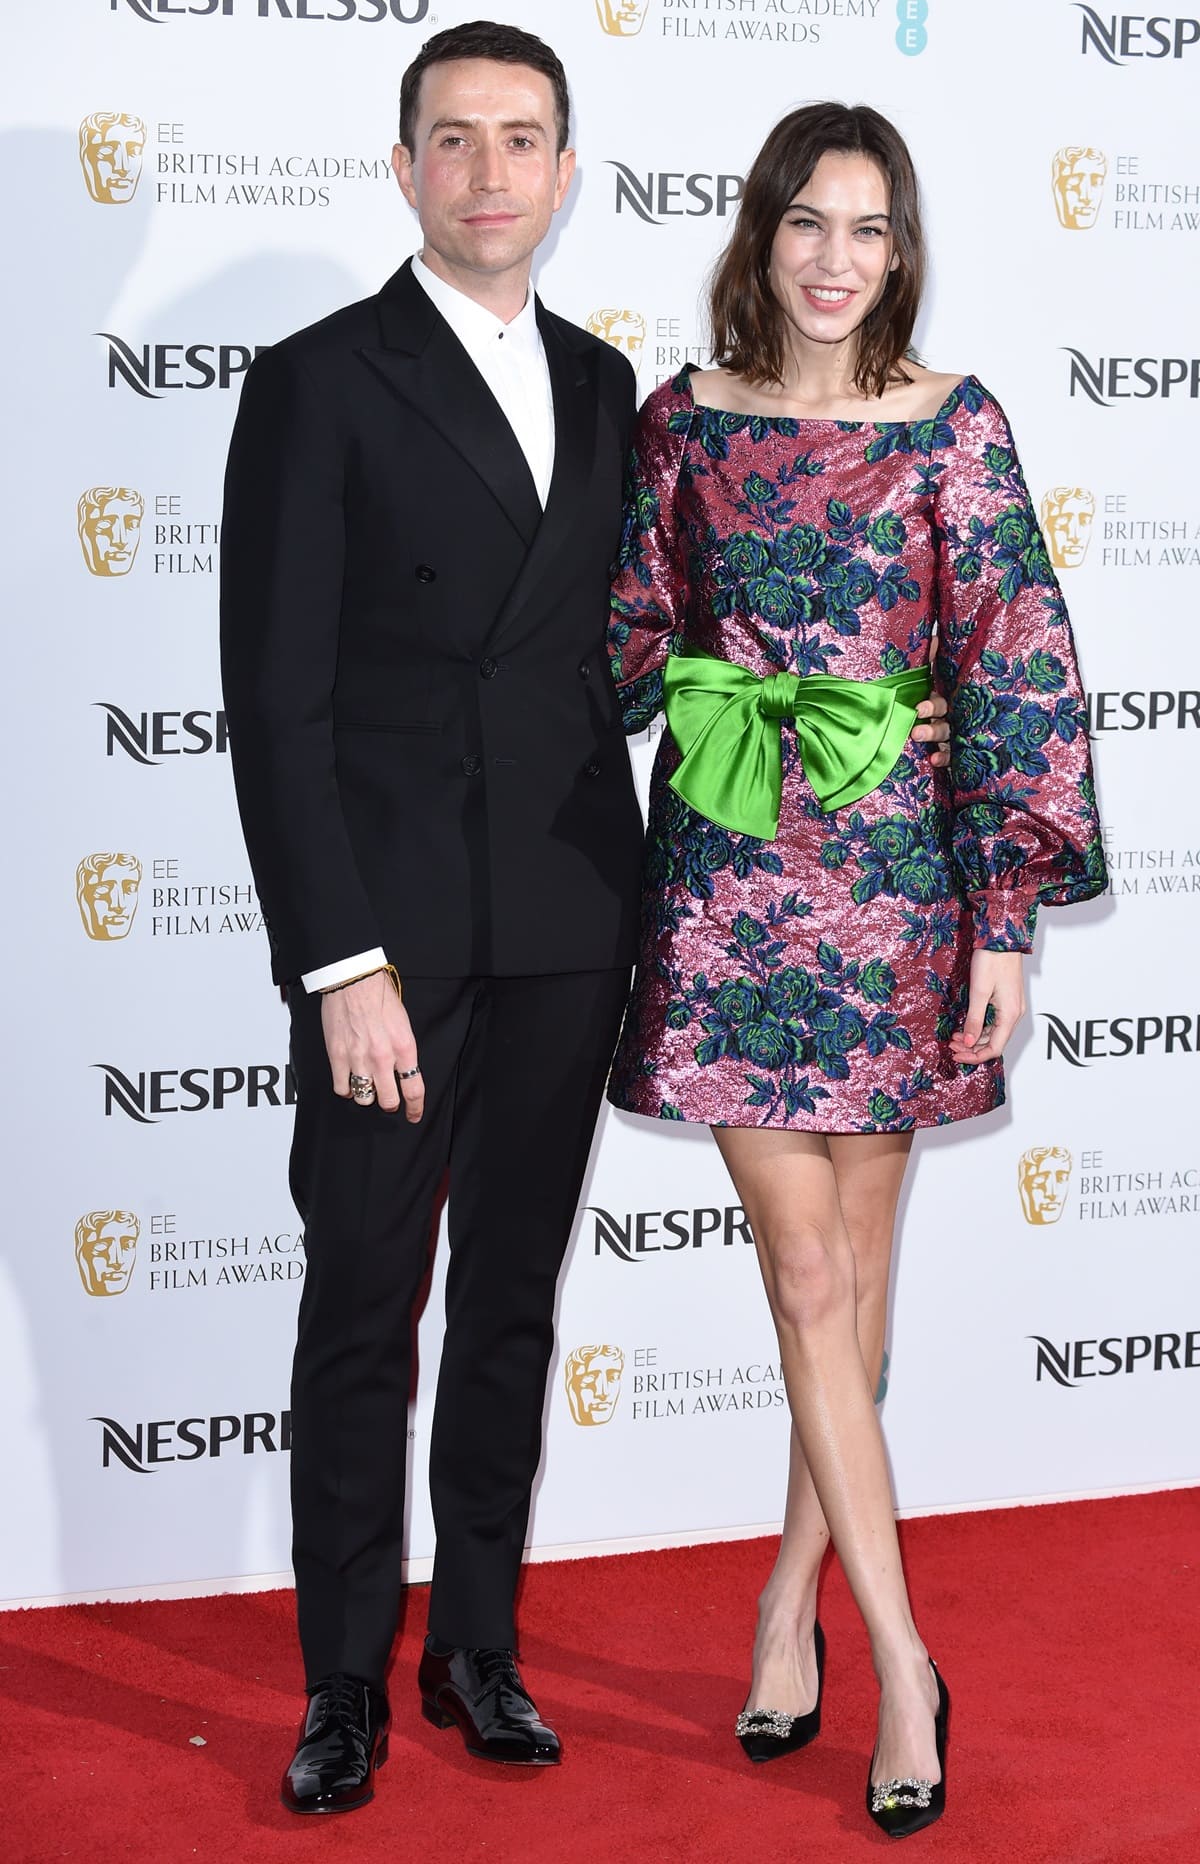 Alexa Chung stands at a height of 5 feet 7 ½ inches (171.5 cm), making her shorter than Nick Grimshaw, who measures 5 feet 10 ½ inches (179.1 cm) tall